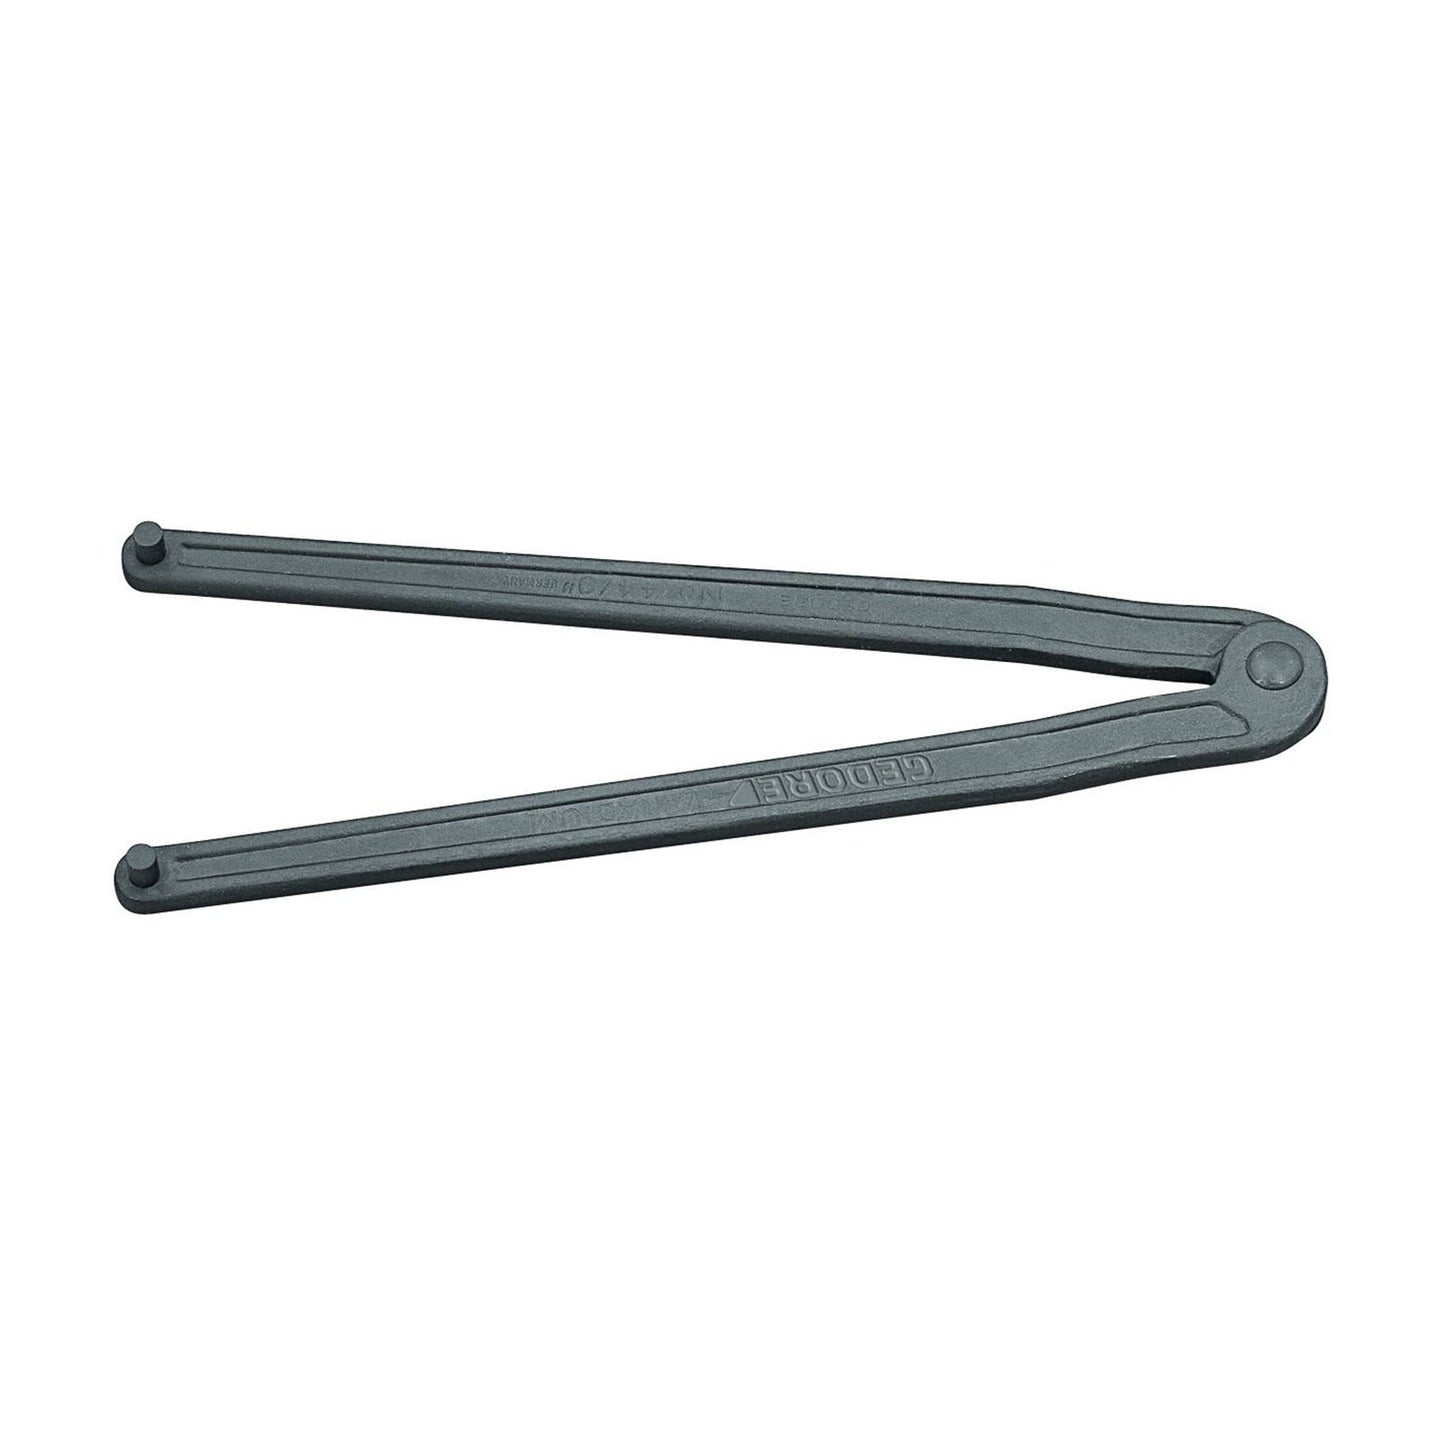 GEDORE 44 8 - Double Pivot Wrench, 8mm (6354990)